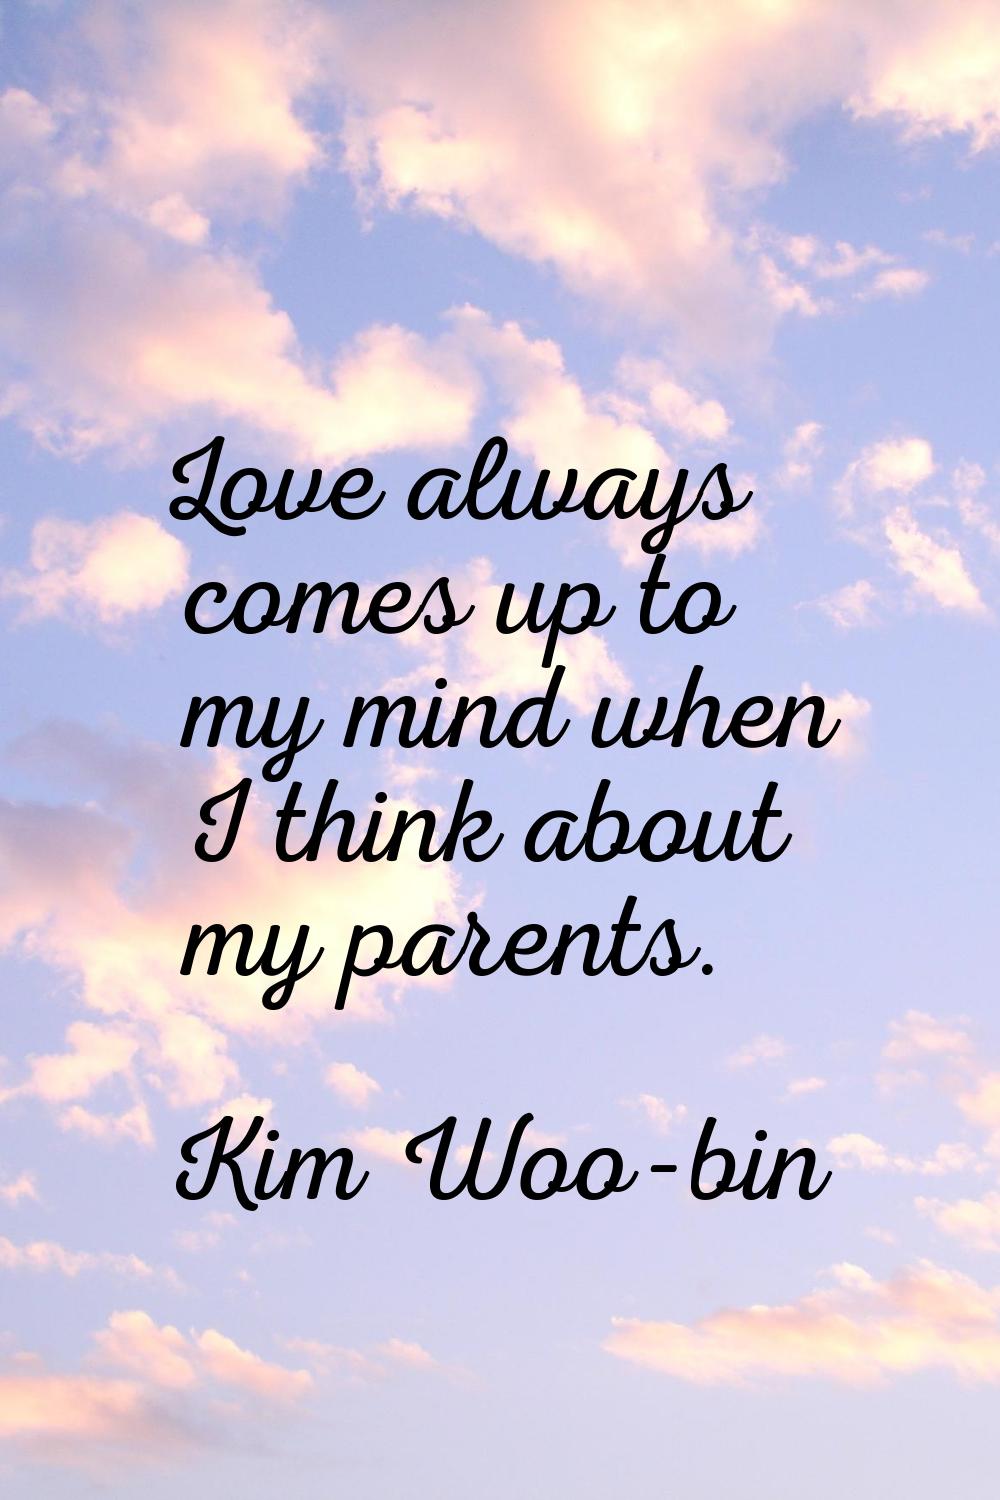 Love always comes up to my mind when I think about my parents.